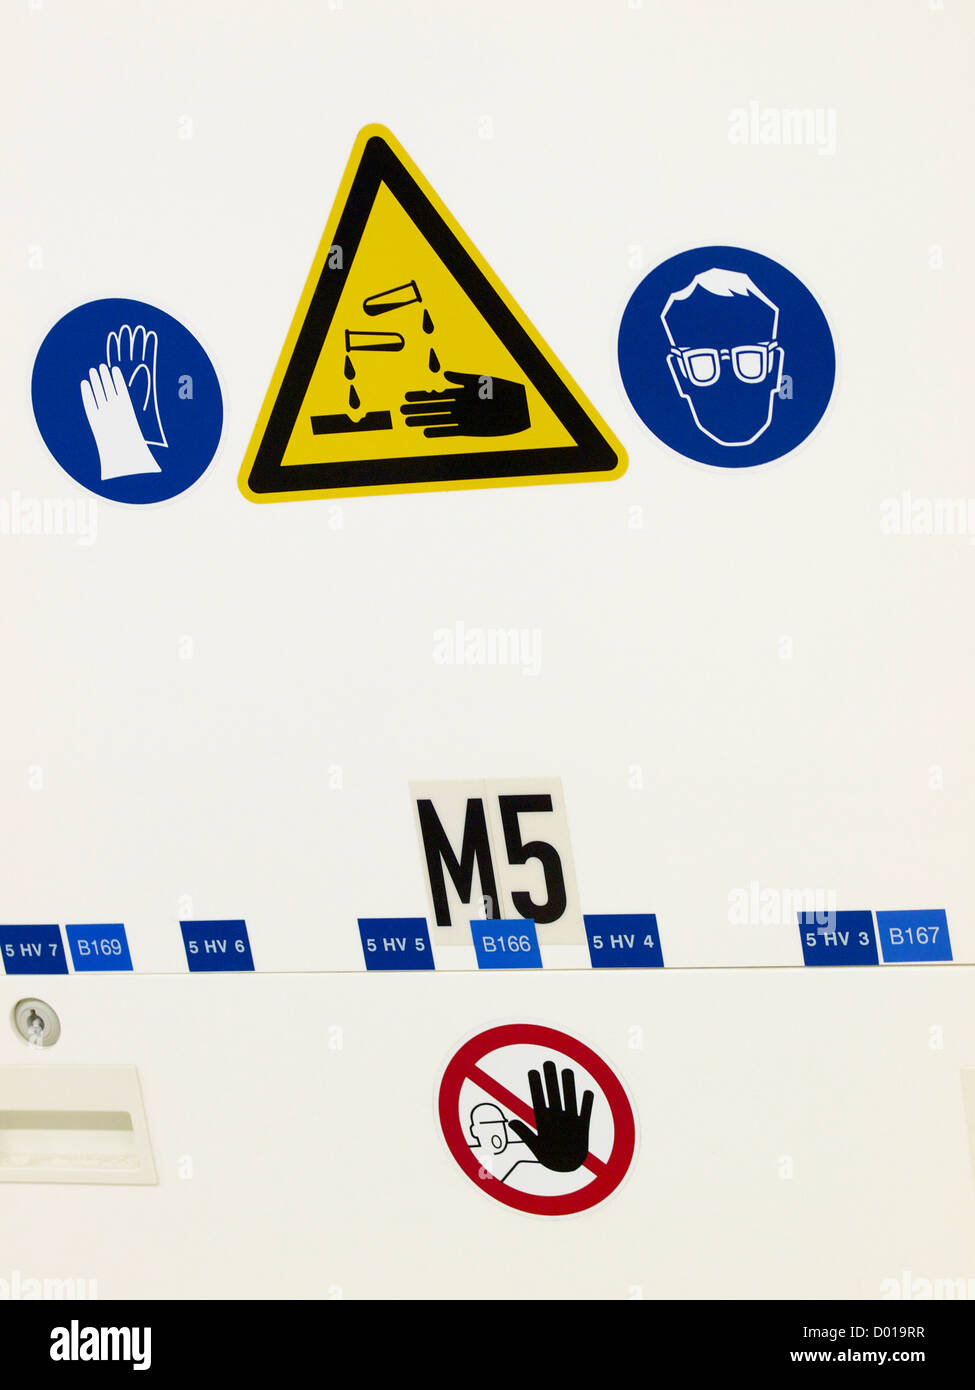 Various industrial warning stickers, gloves needed, danger corroding fluids, eye protection needed. Stock Photo